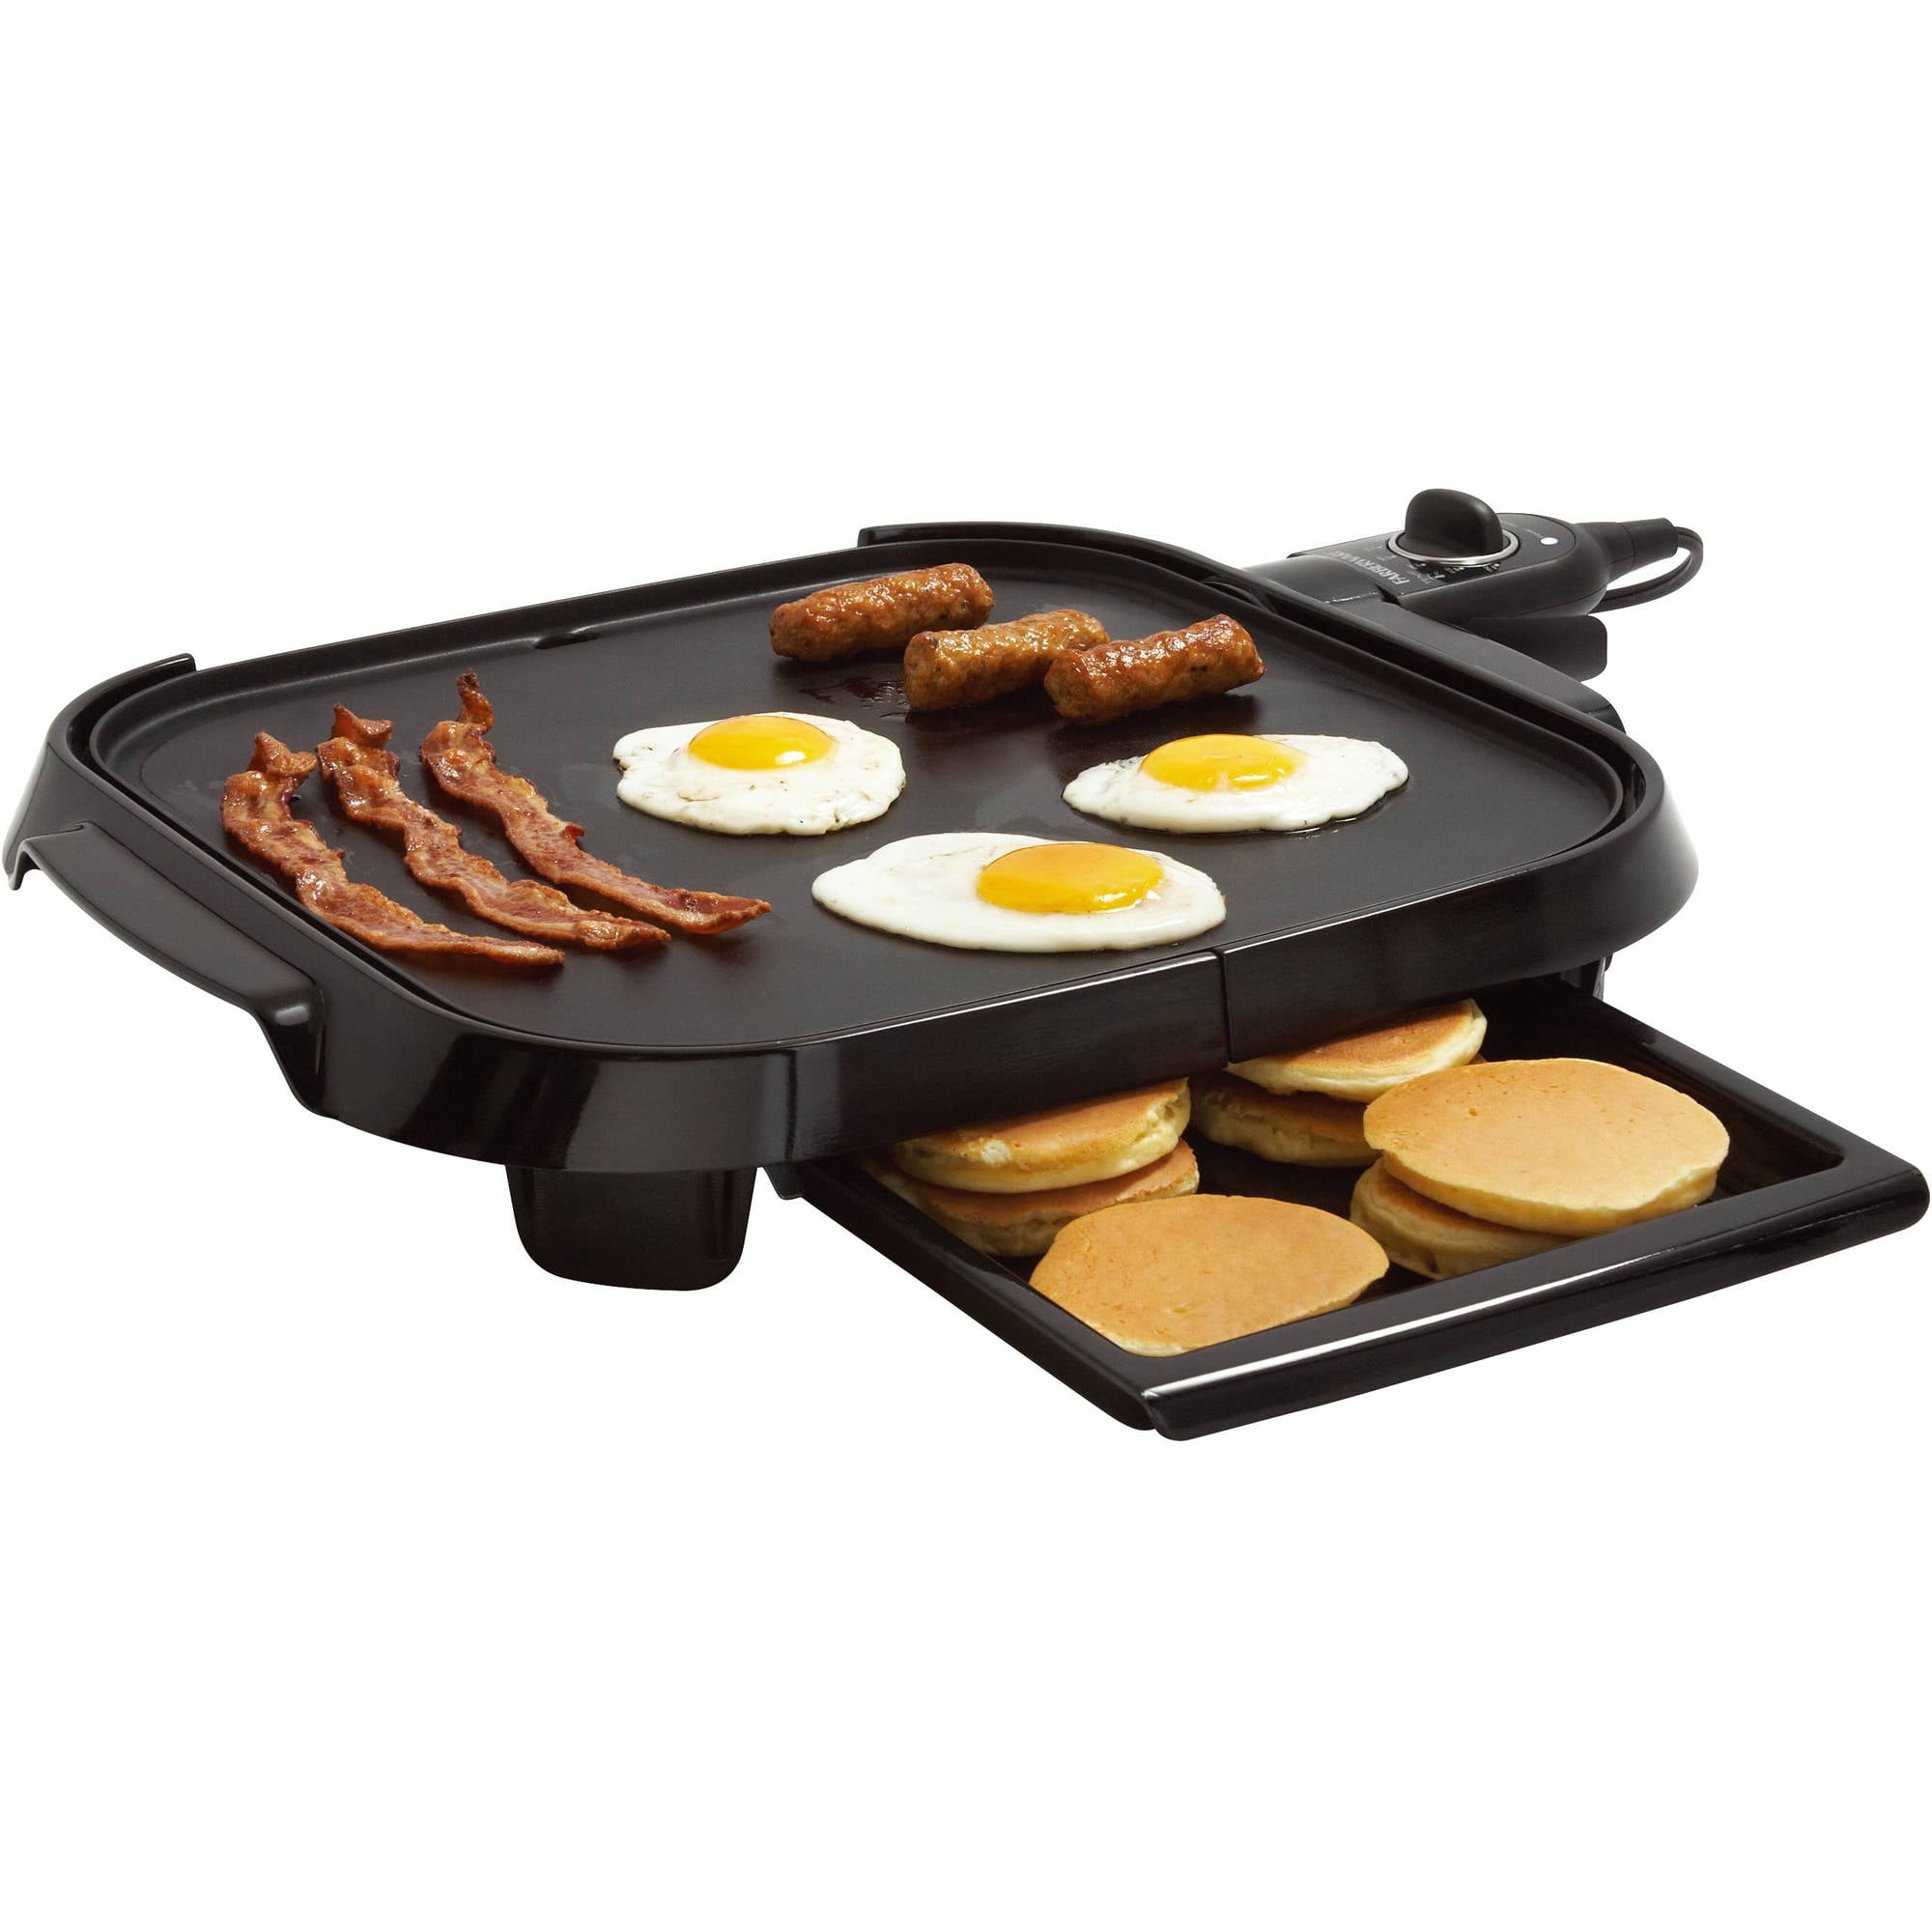 FARBERWARE 16 Inch Griddle for Sale in US - OfferUp